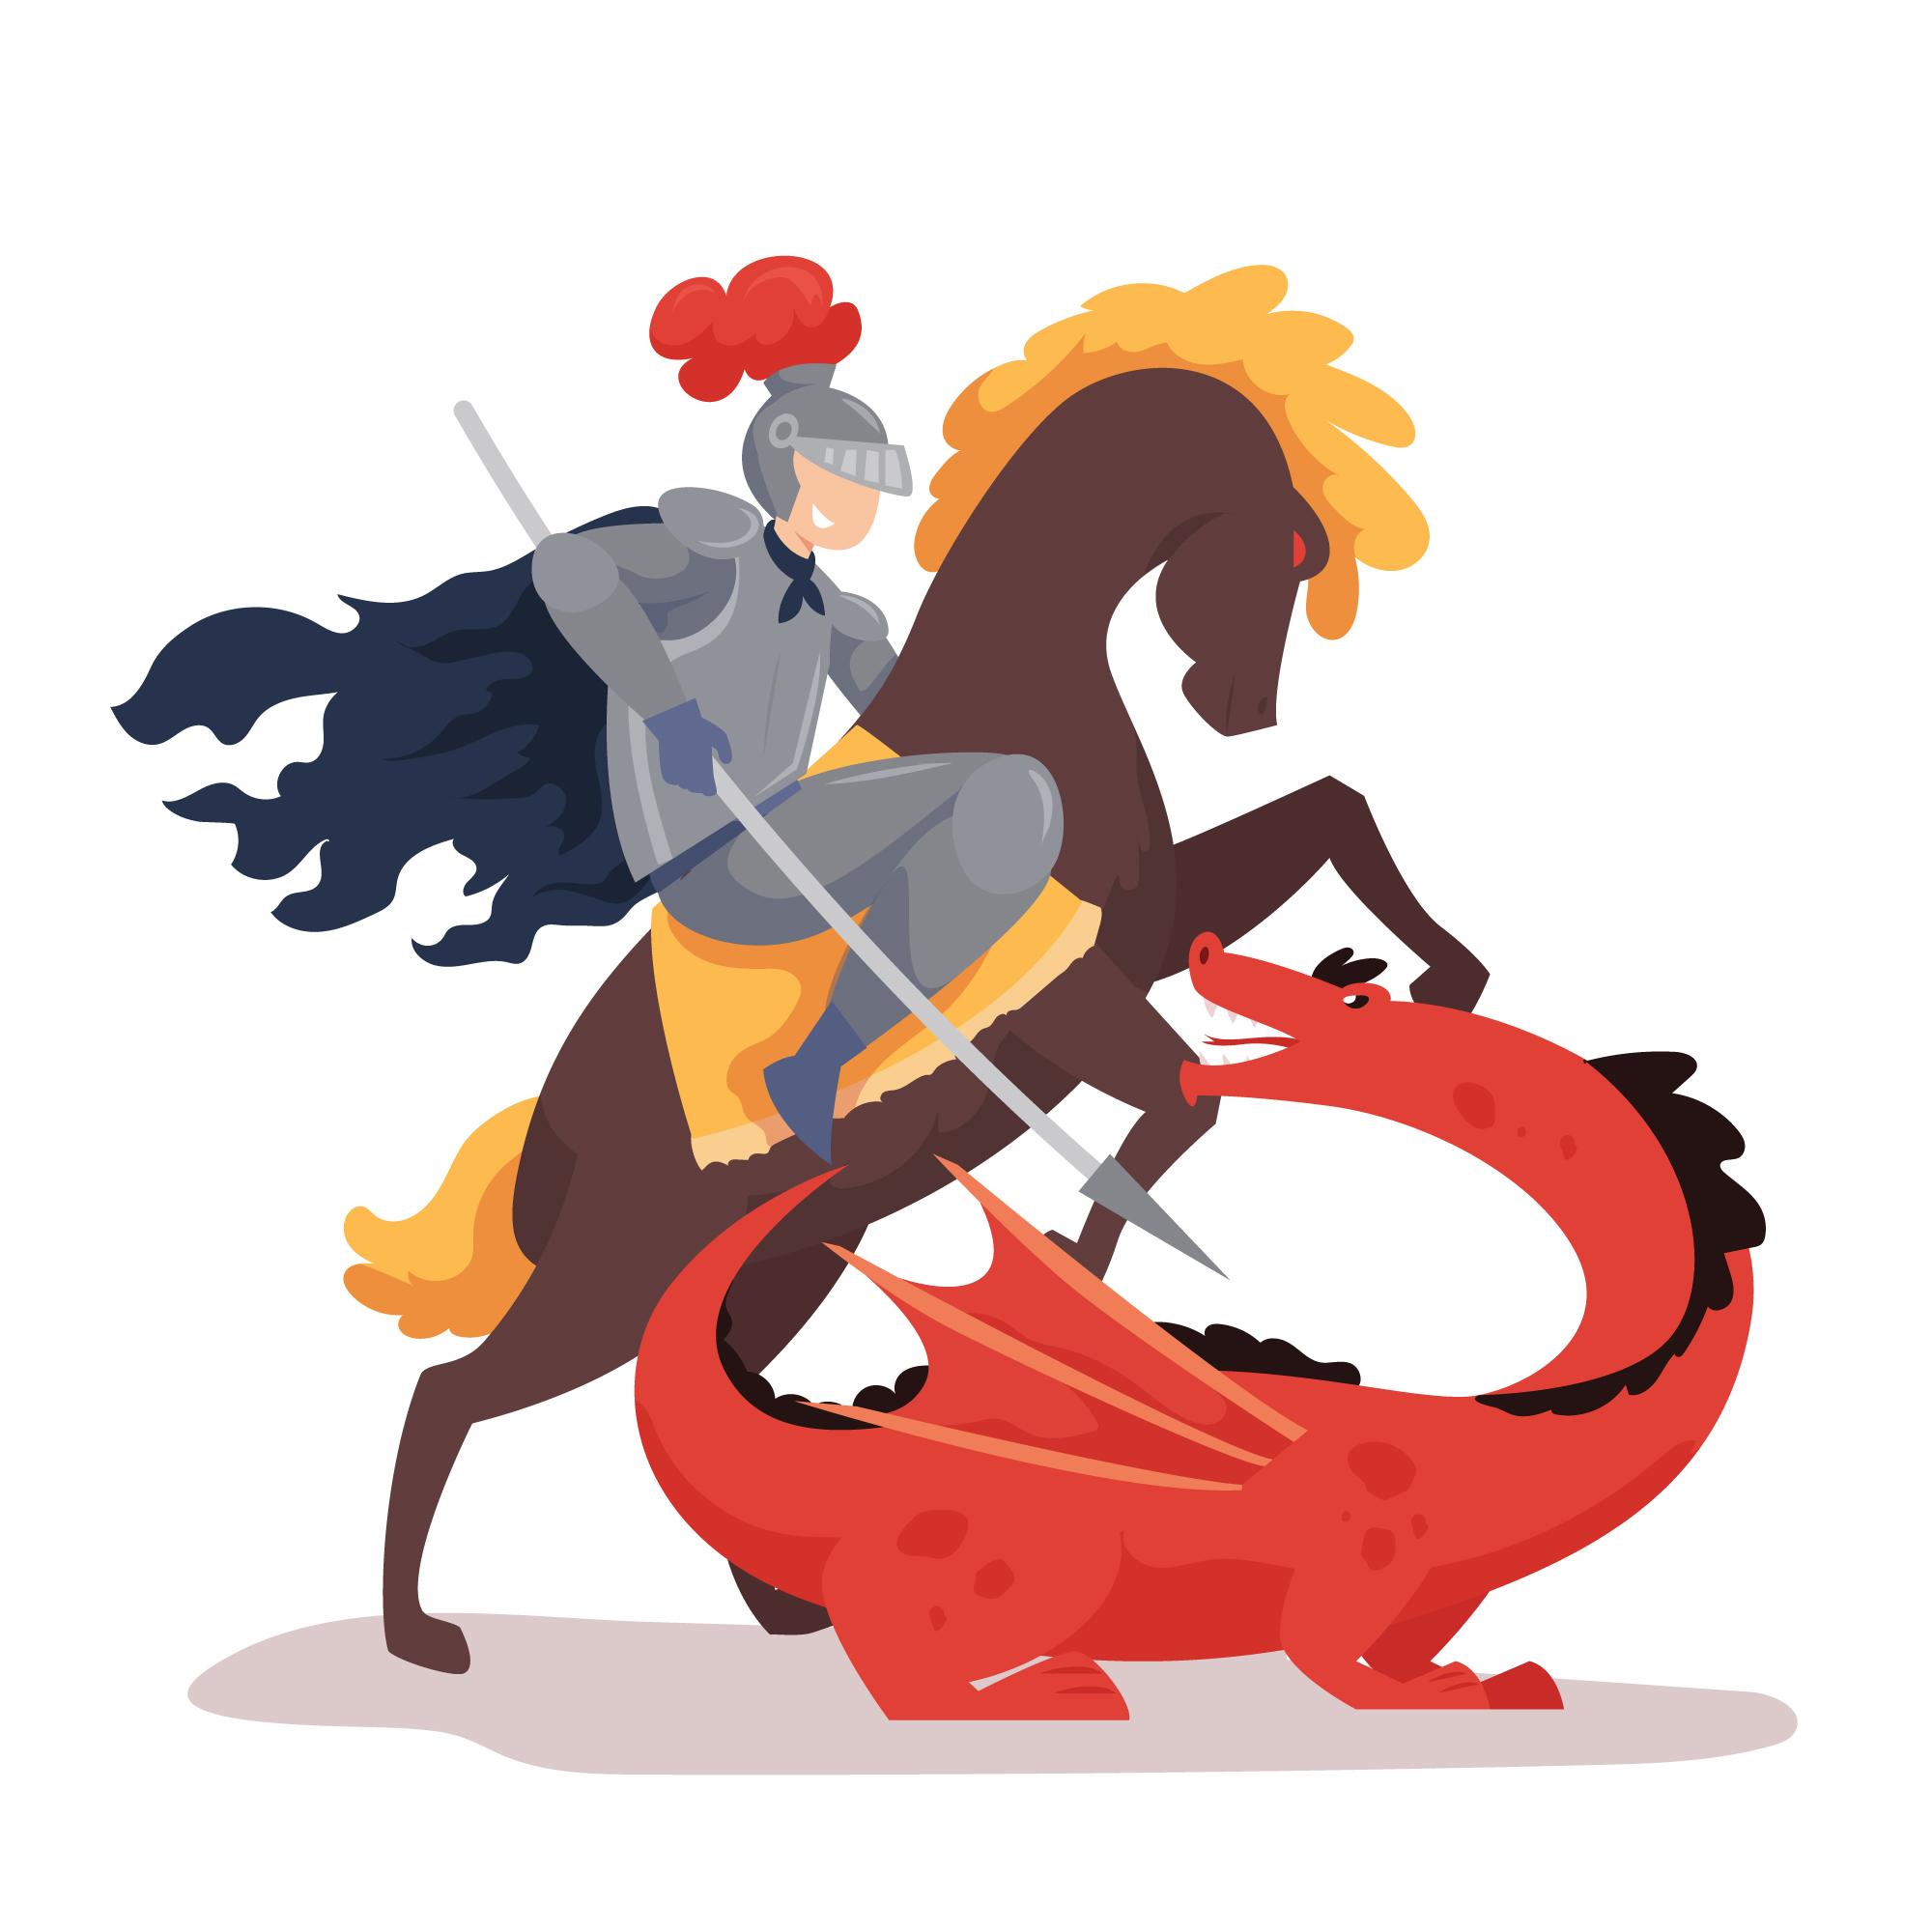 St George and the Dragon – The Dragon’s Connection